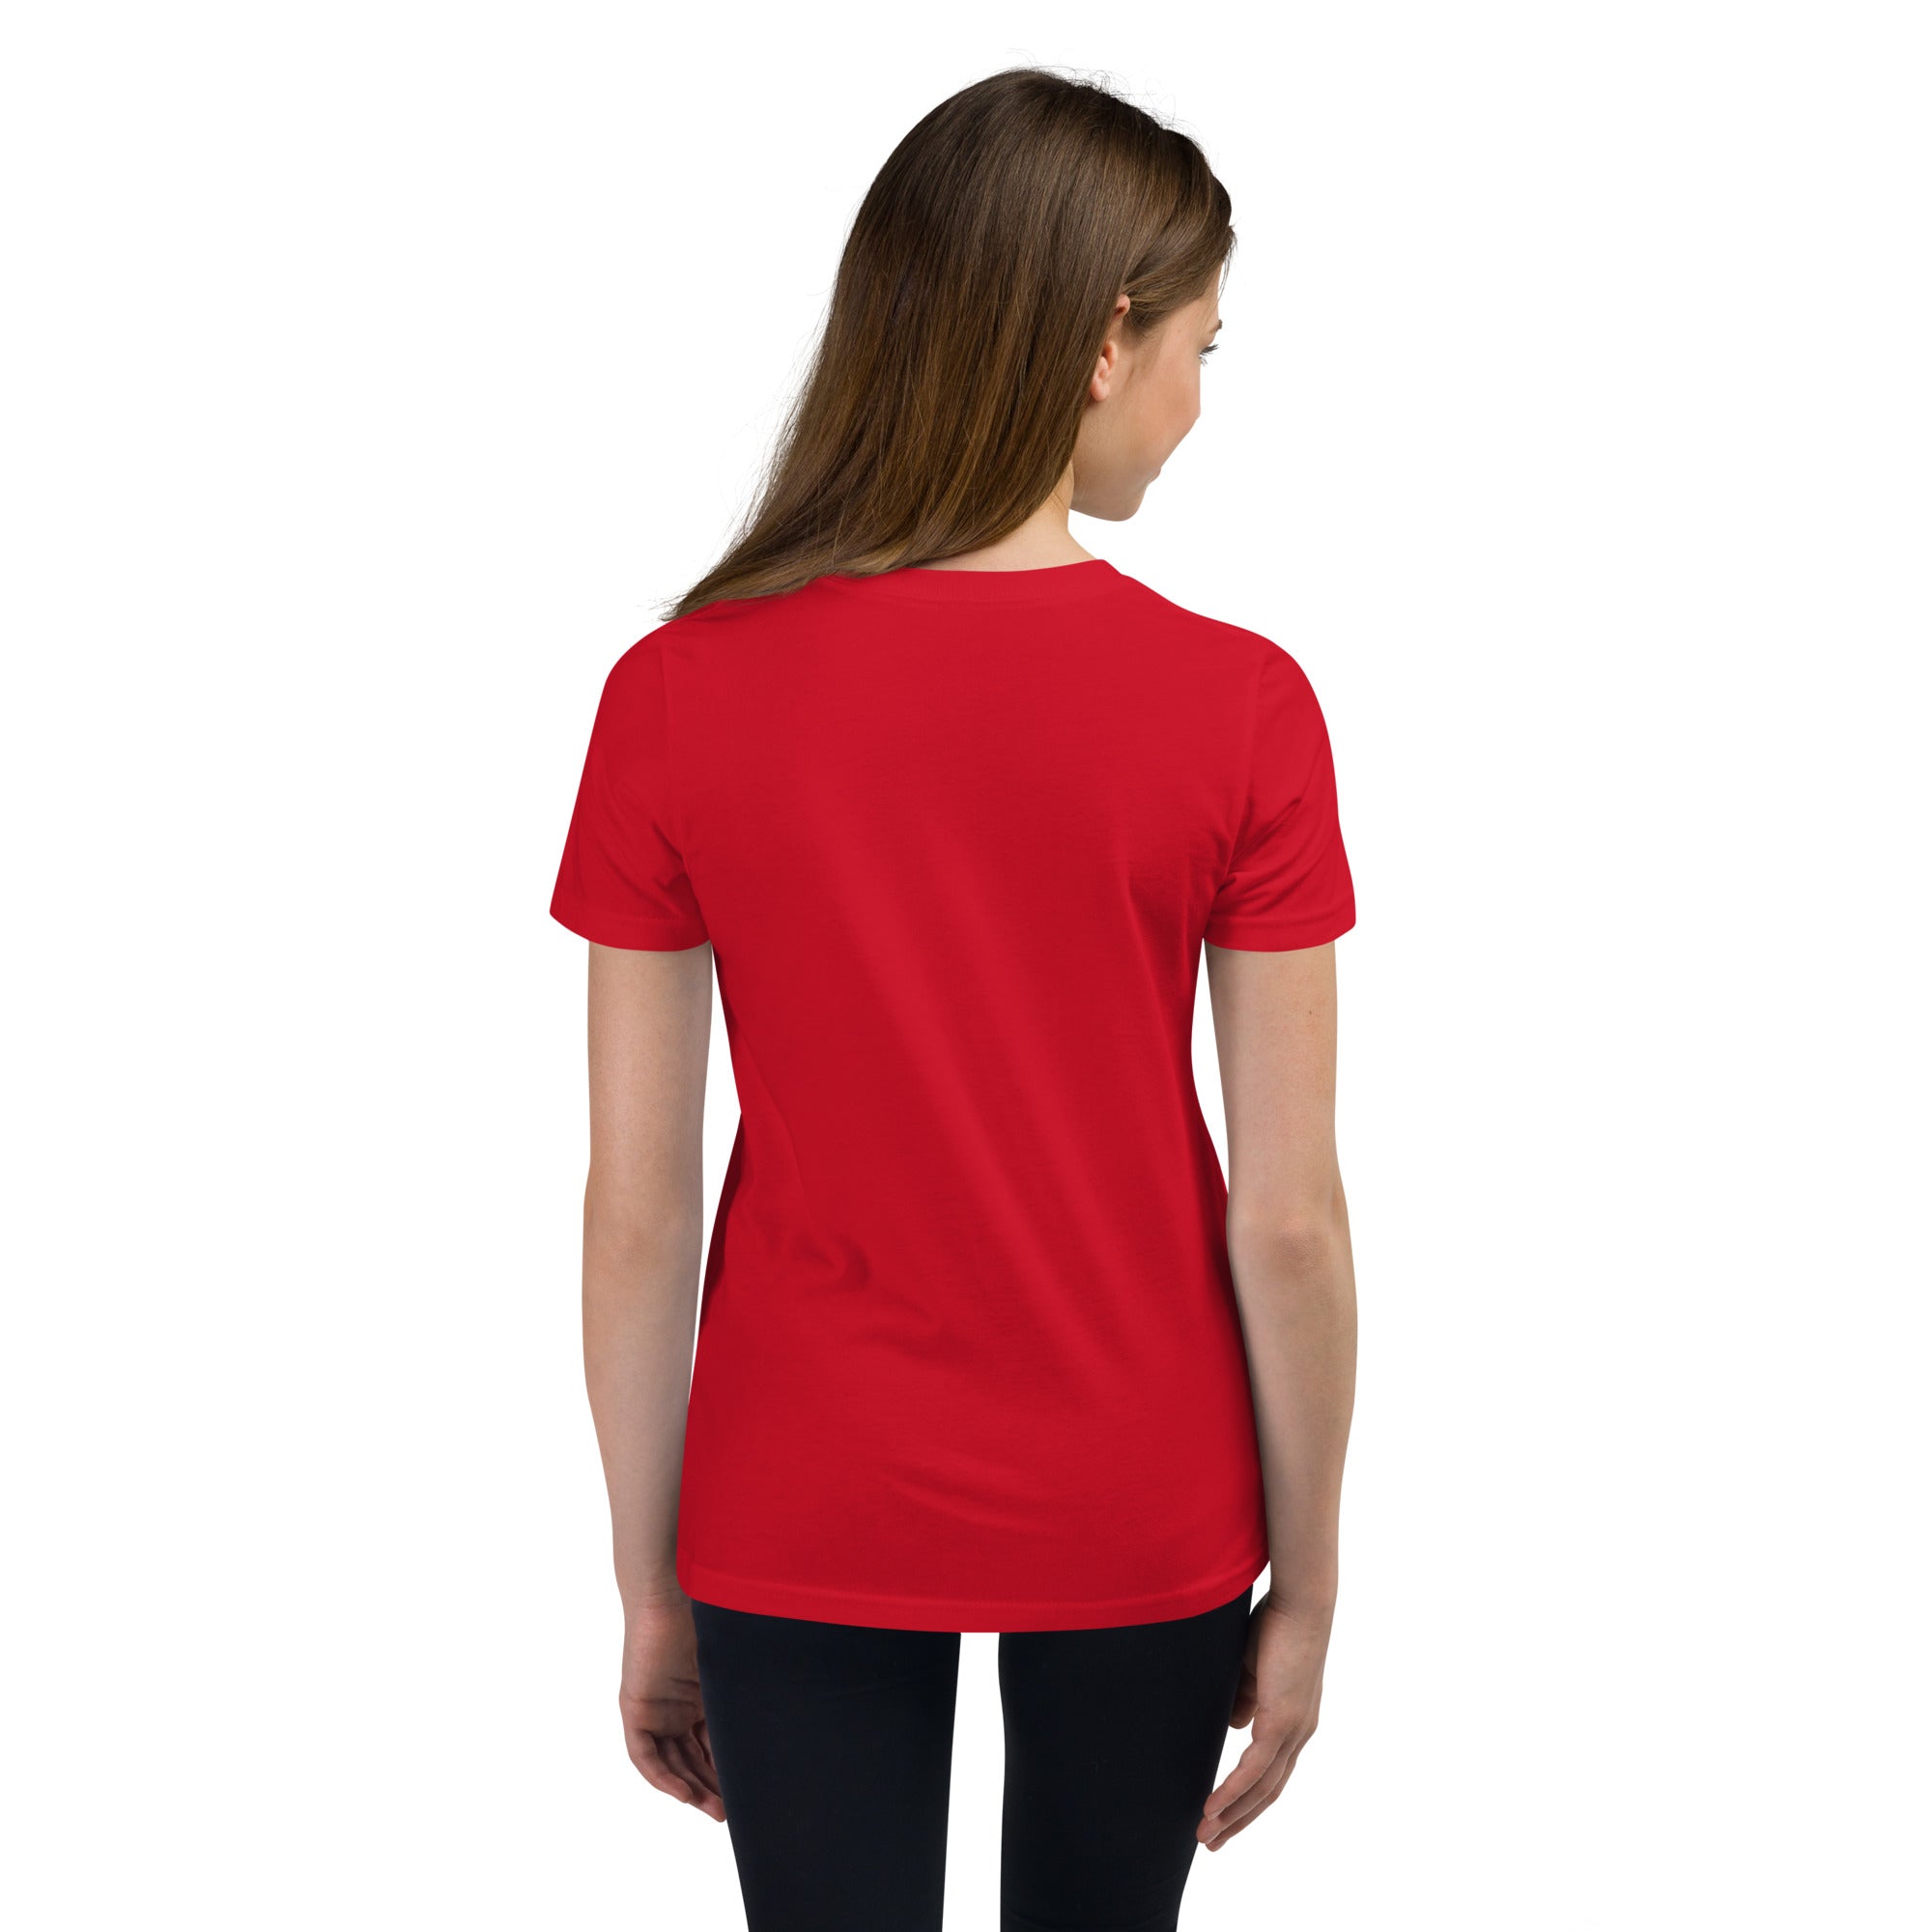 Autism Advocate Youth Graphic Tees